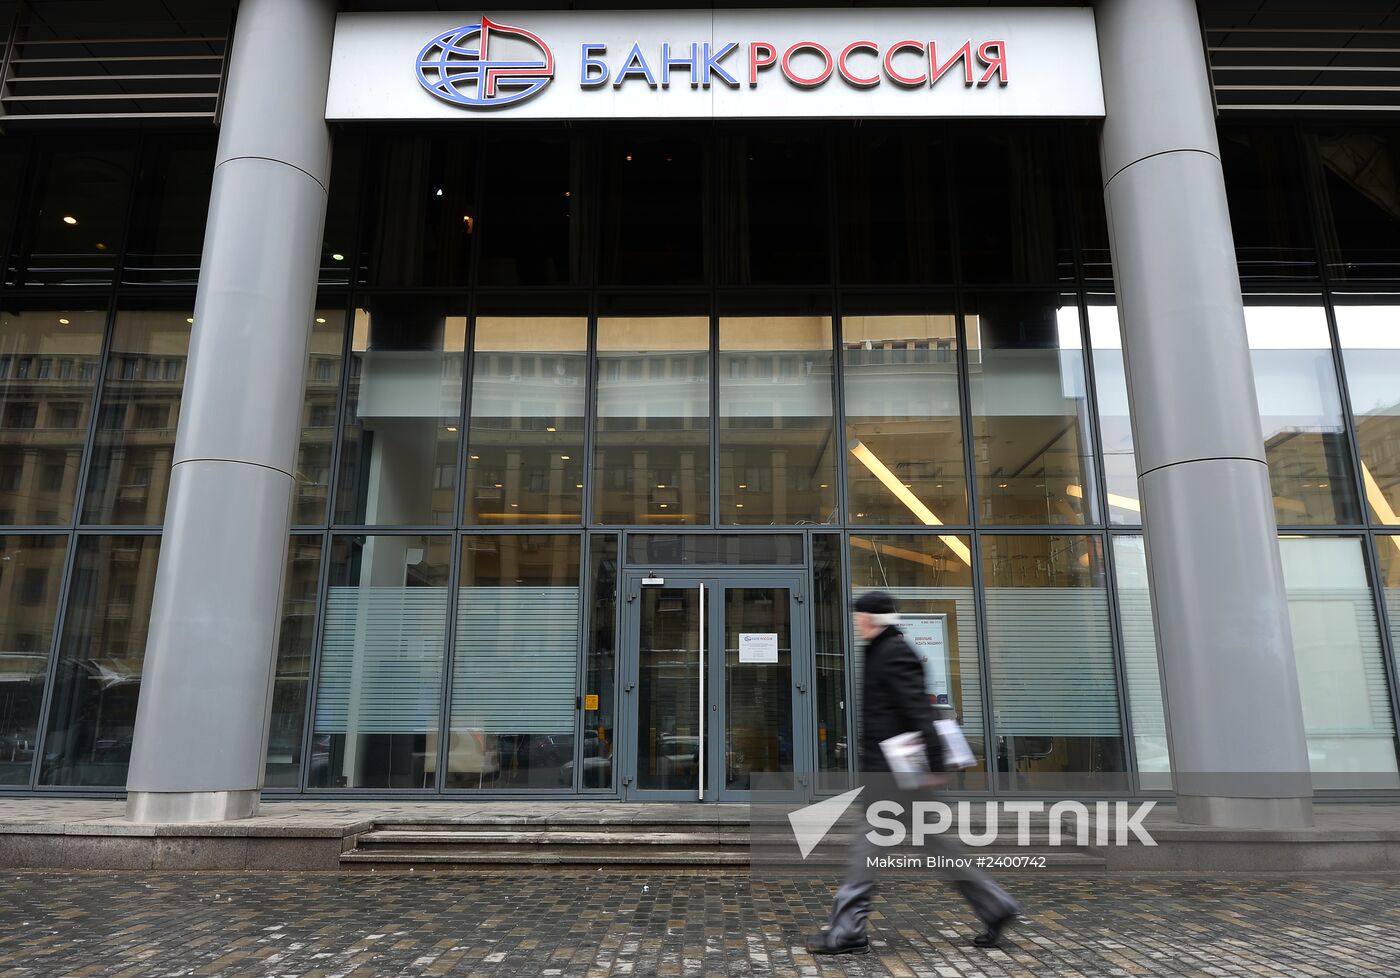 Visa, Mastercard stop providing payment services to banks Rossiya and SMP